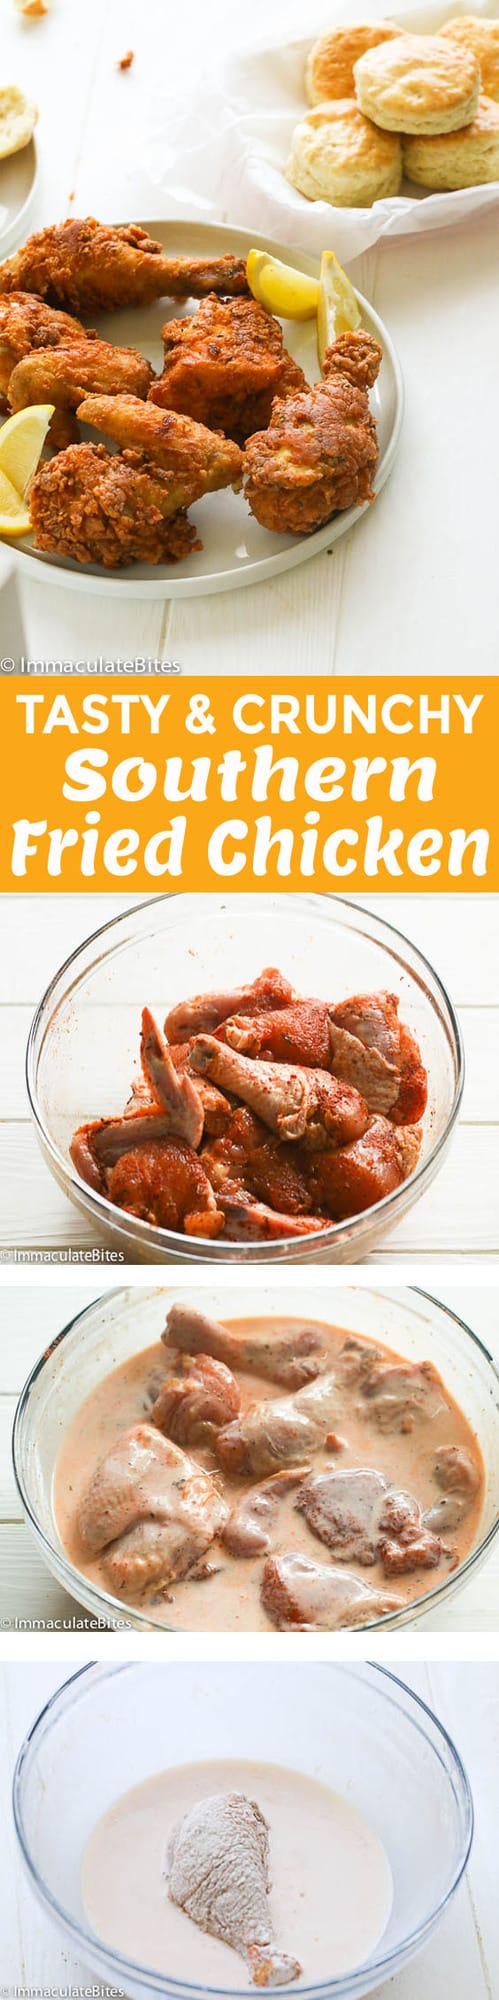 southern fried chicken with steps